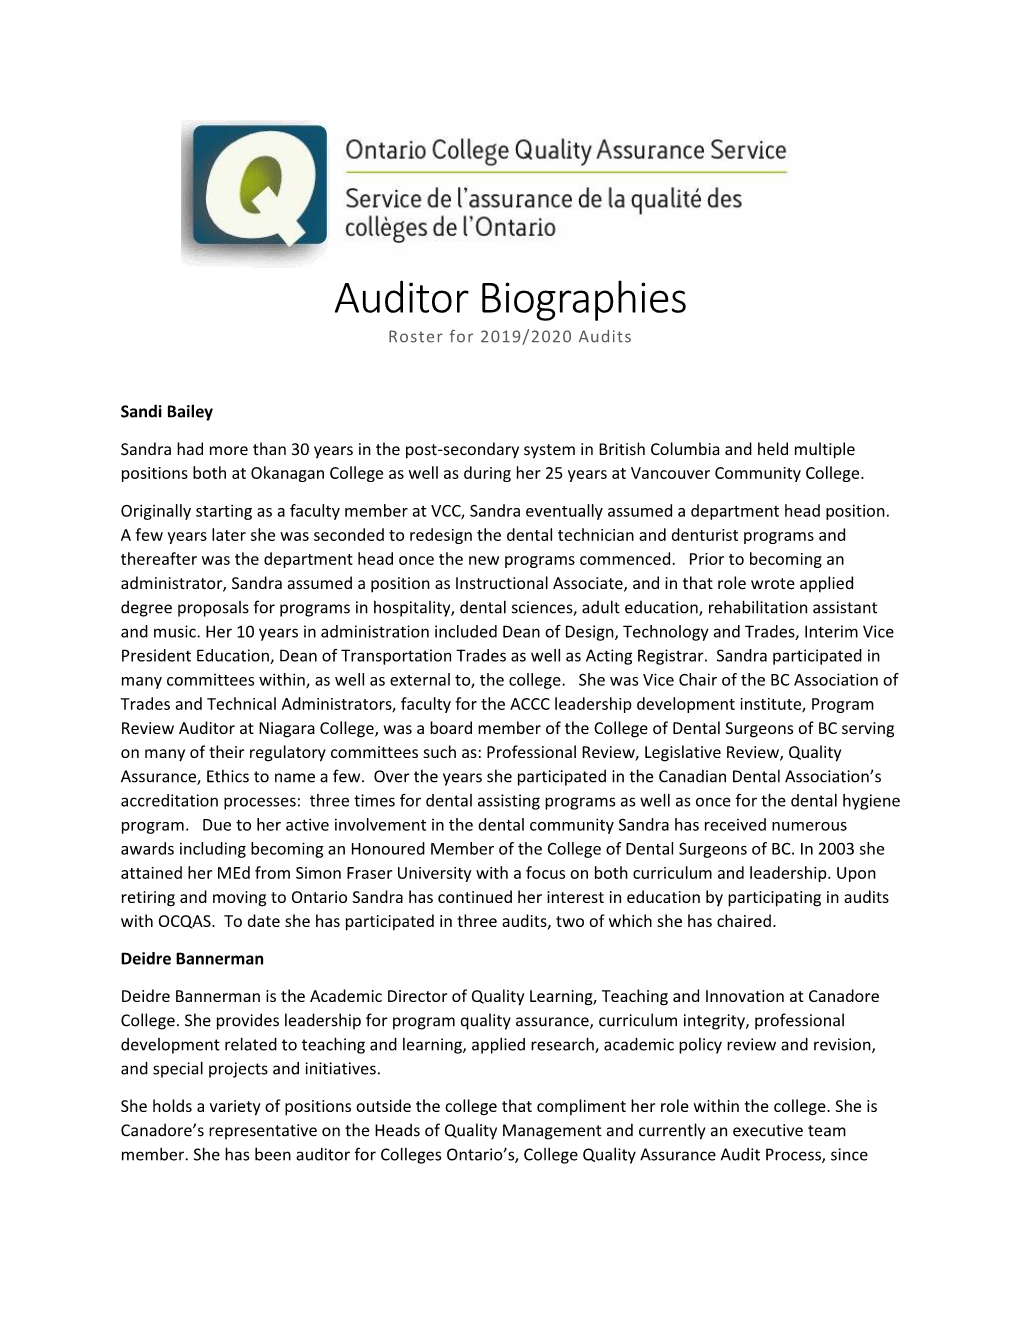 Auditor Biographies Roster for 2019/2020 Audits